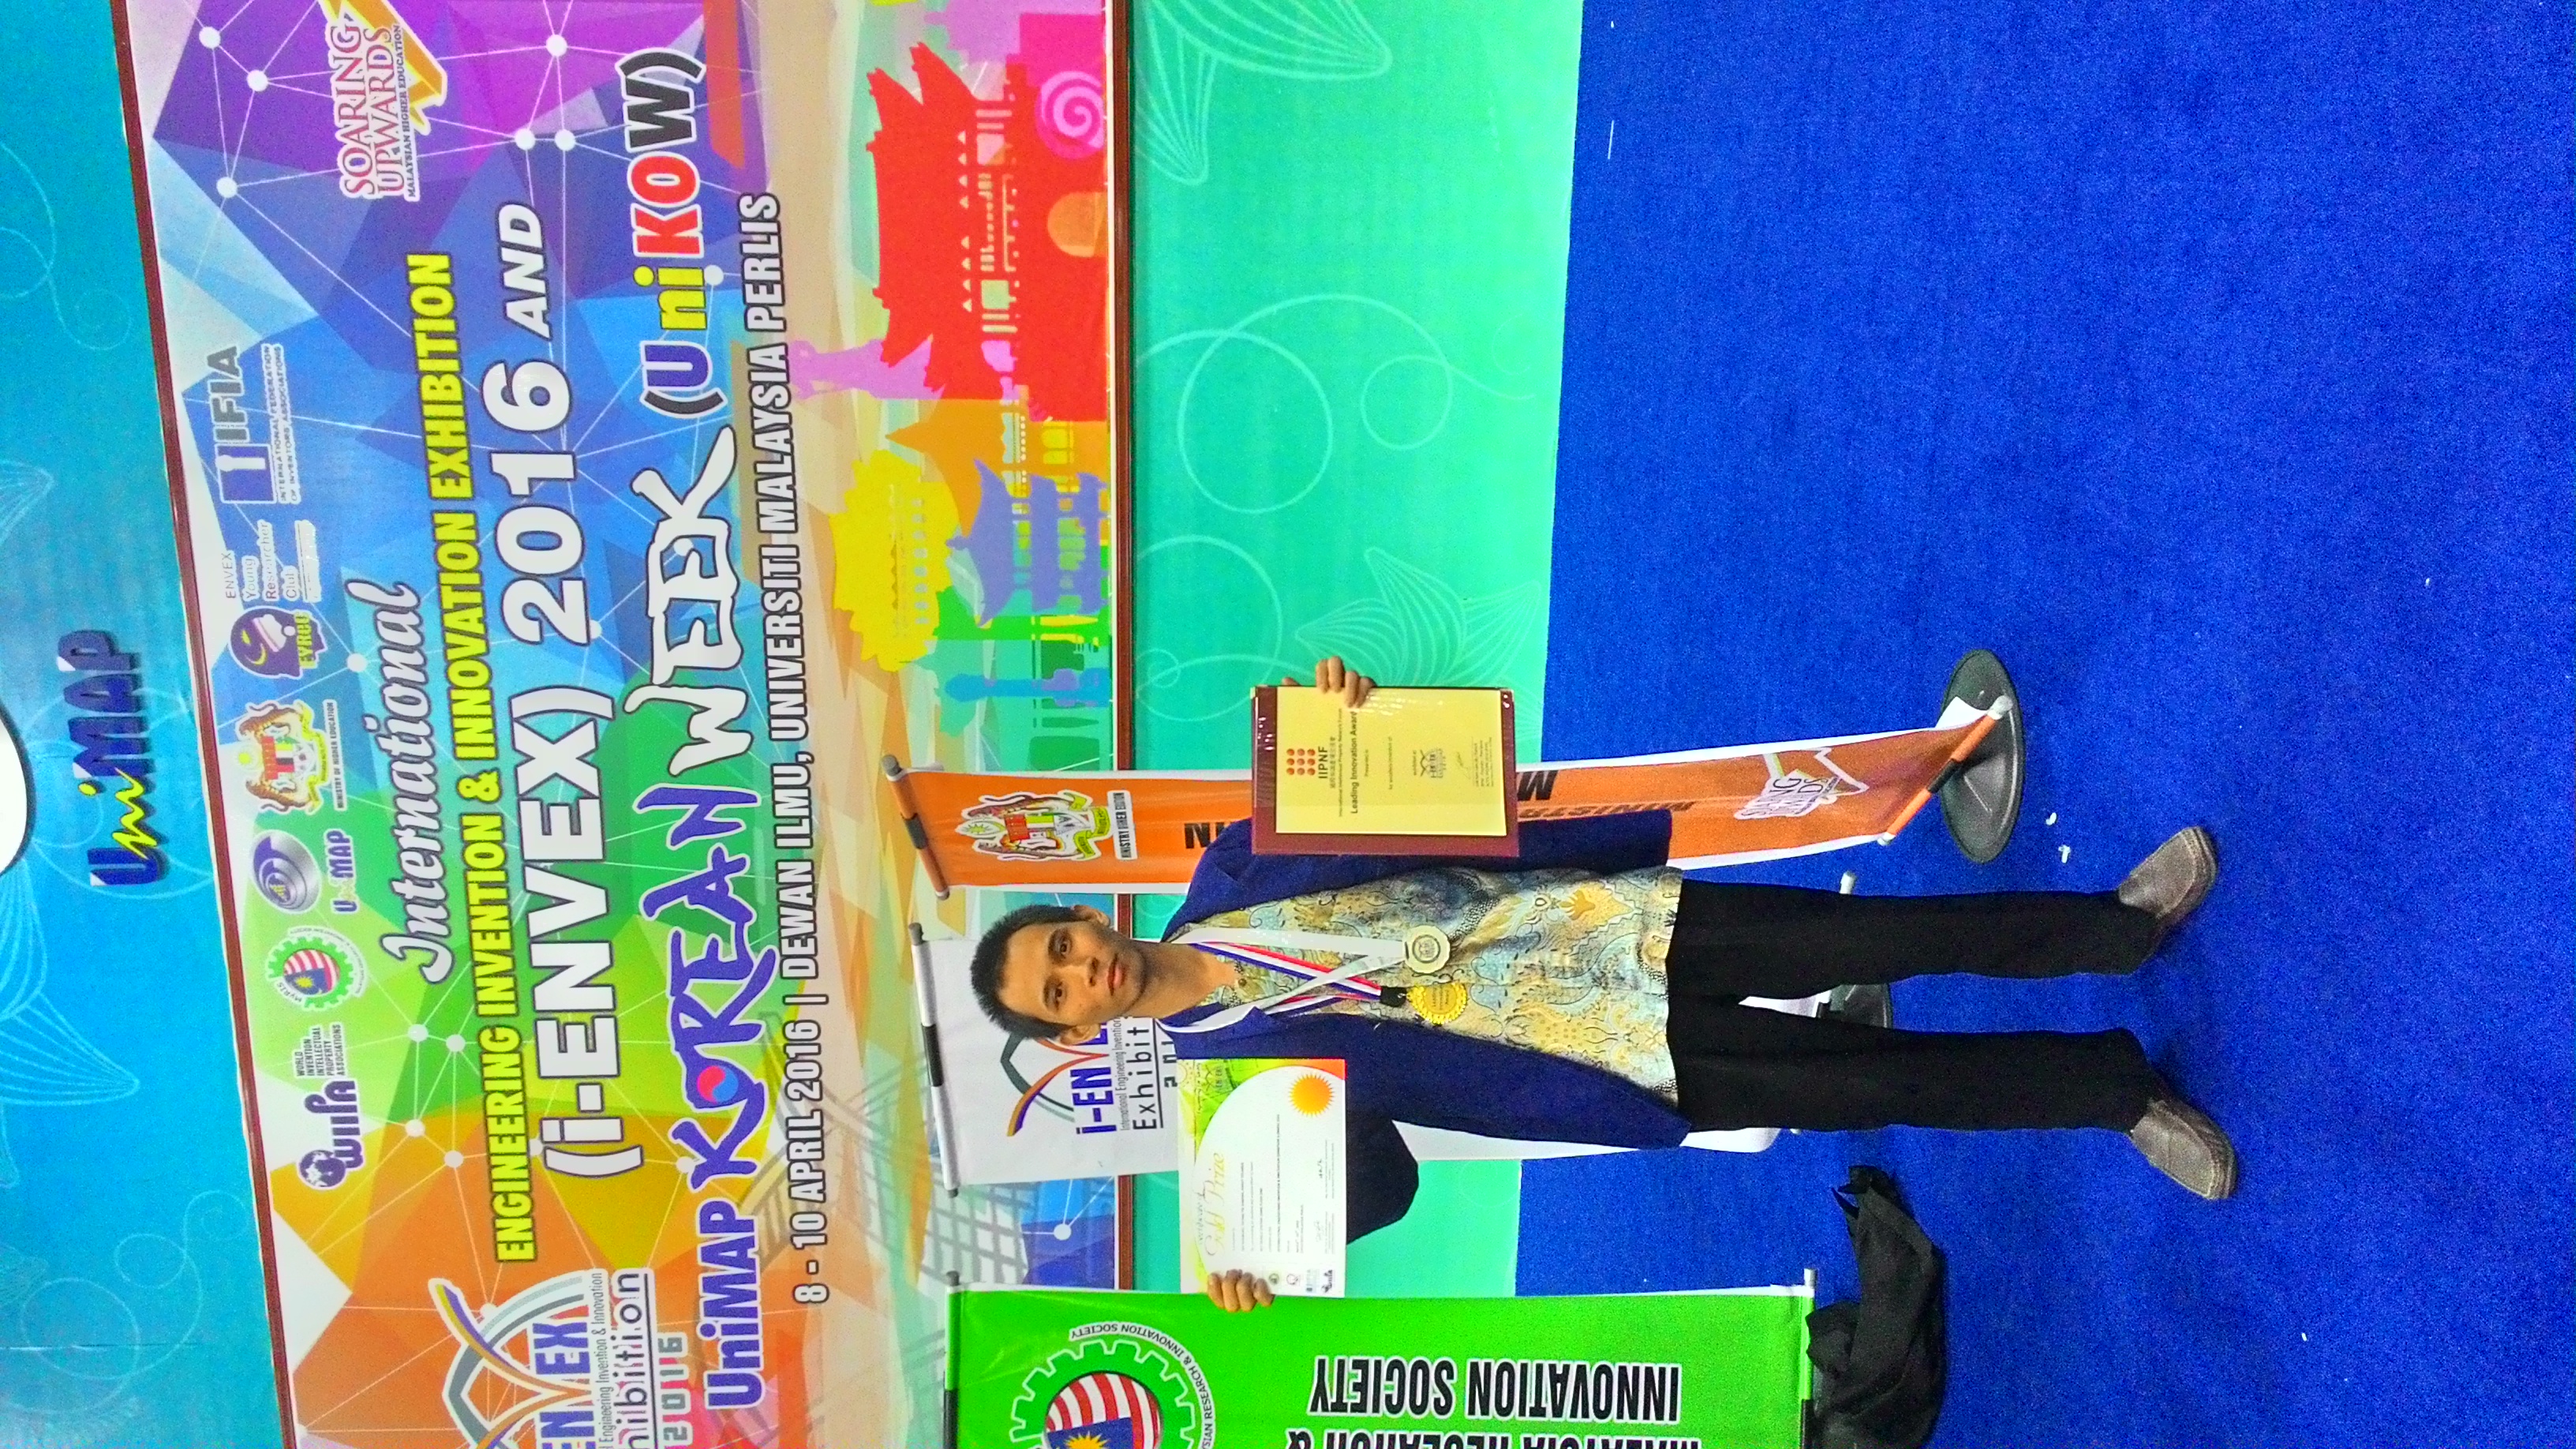 Foto 1ST Winner (Gold Medal) Category of ICT and Electronics in International Engineering Innovation Invention Exhibition (I-ENVEX) from MY ENG, WIIPA and IFIA  at Universiti Malaysia Perlis, Perlis, Malaysia, April 2016.